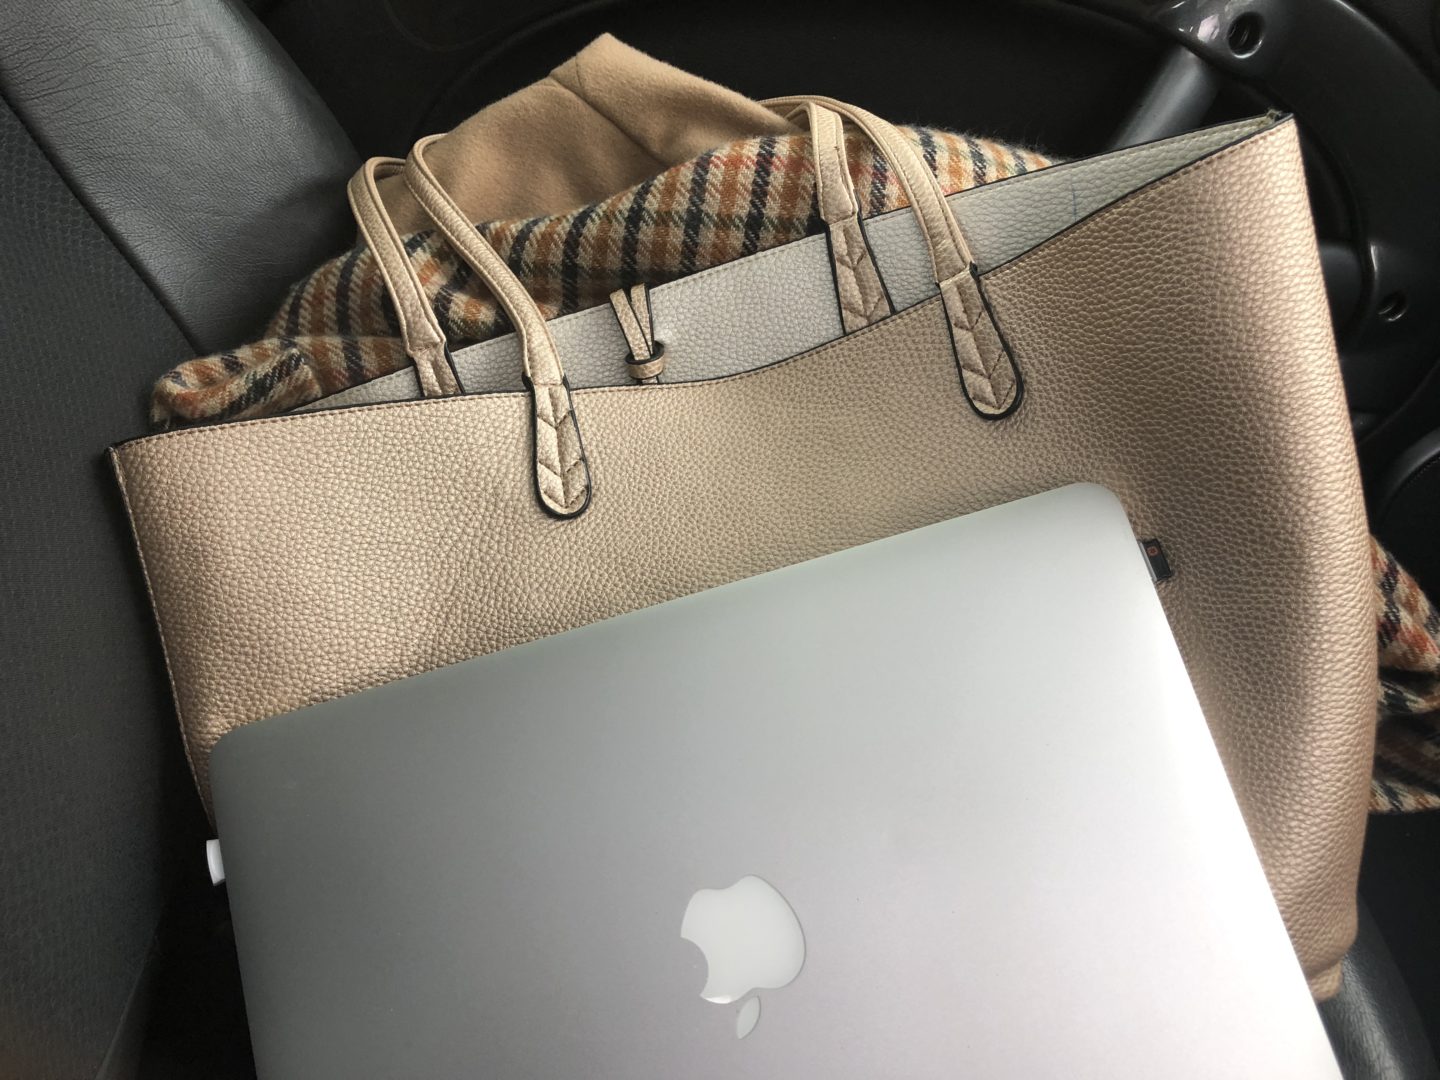 Laptop packed for VIP client day